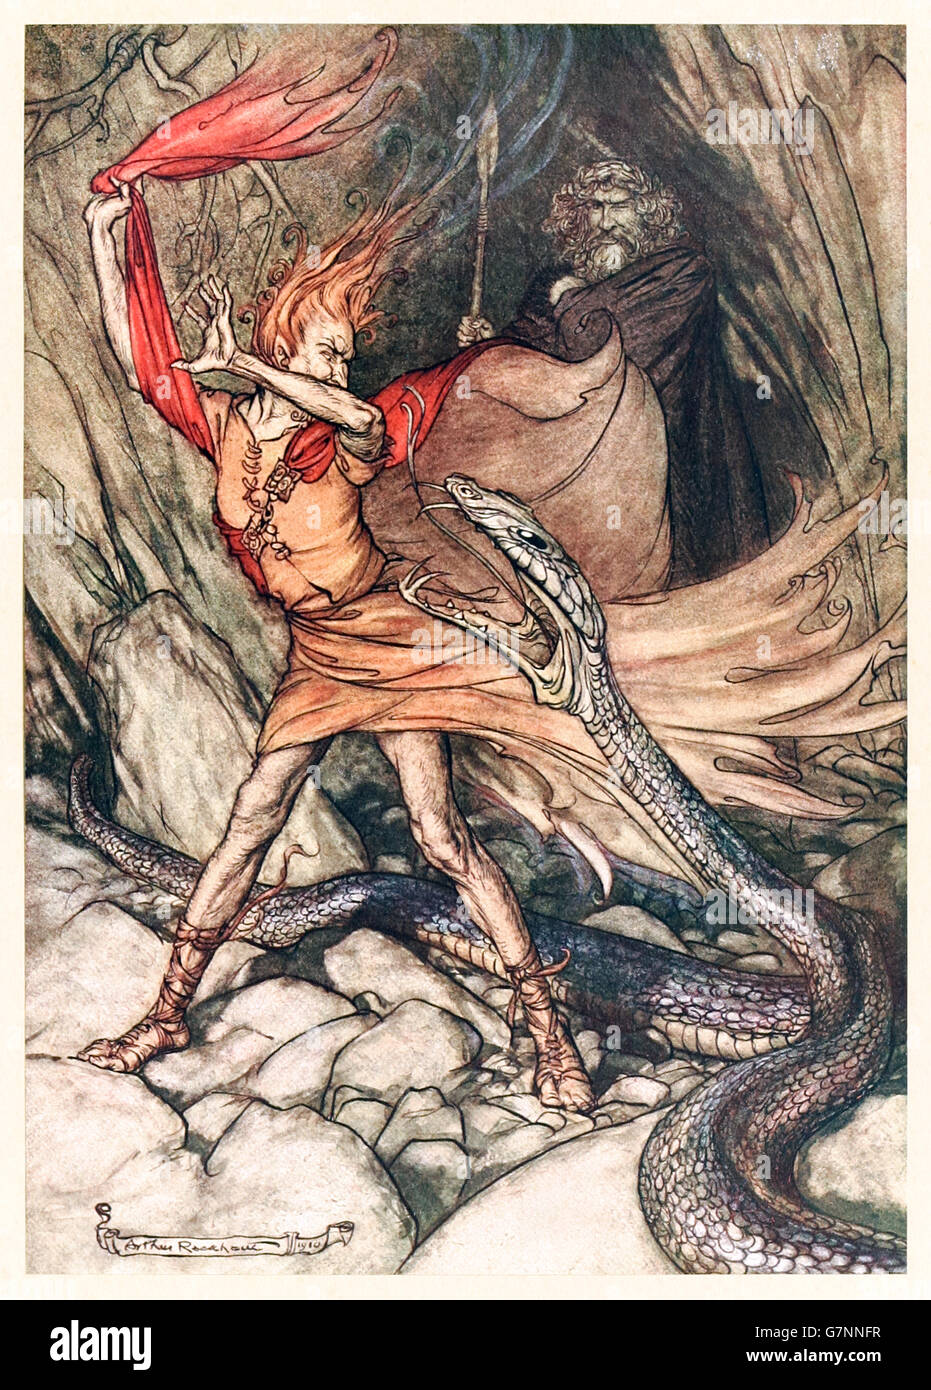 “Ohe! Ohe! Horrible dragon, O swallow me not! Spare the life of poor Loge!” from ‘The Rhinegold & the Valkyrie’ illustrated by Arthur Rackham (1867-1939), published in 1910. Alberich wields the power of the Tarnhelm (magic helmet) transforming himself into a giant snake as Loge and Wotan look on. Stock Photo